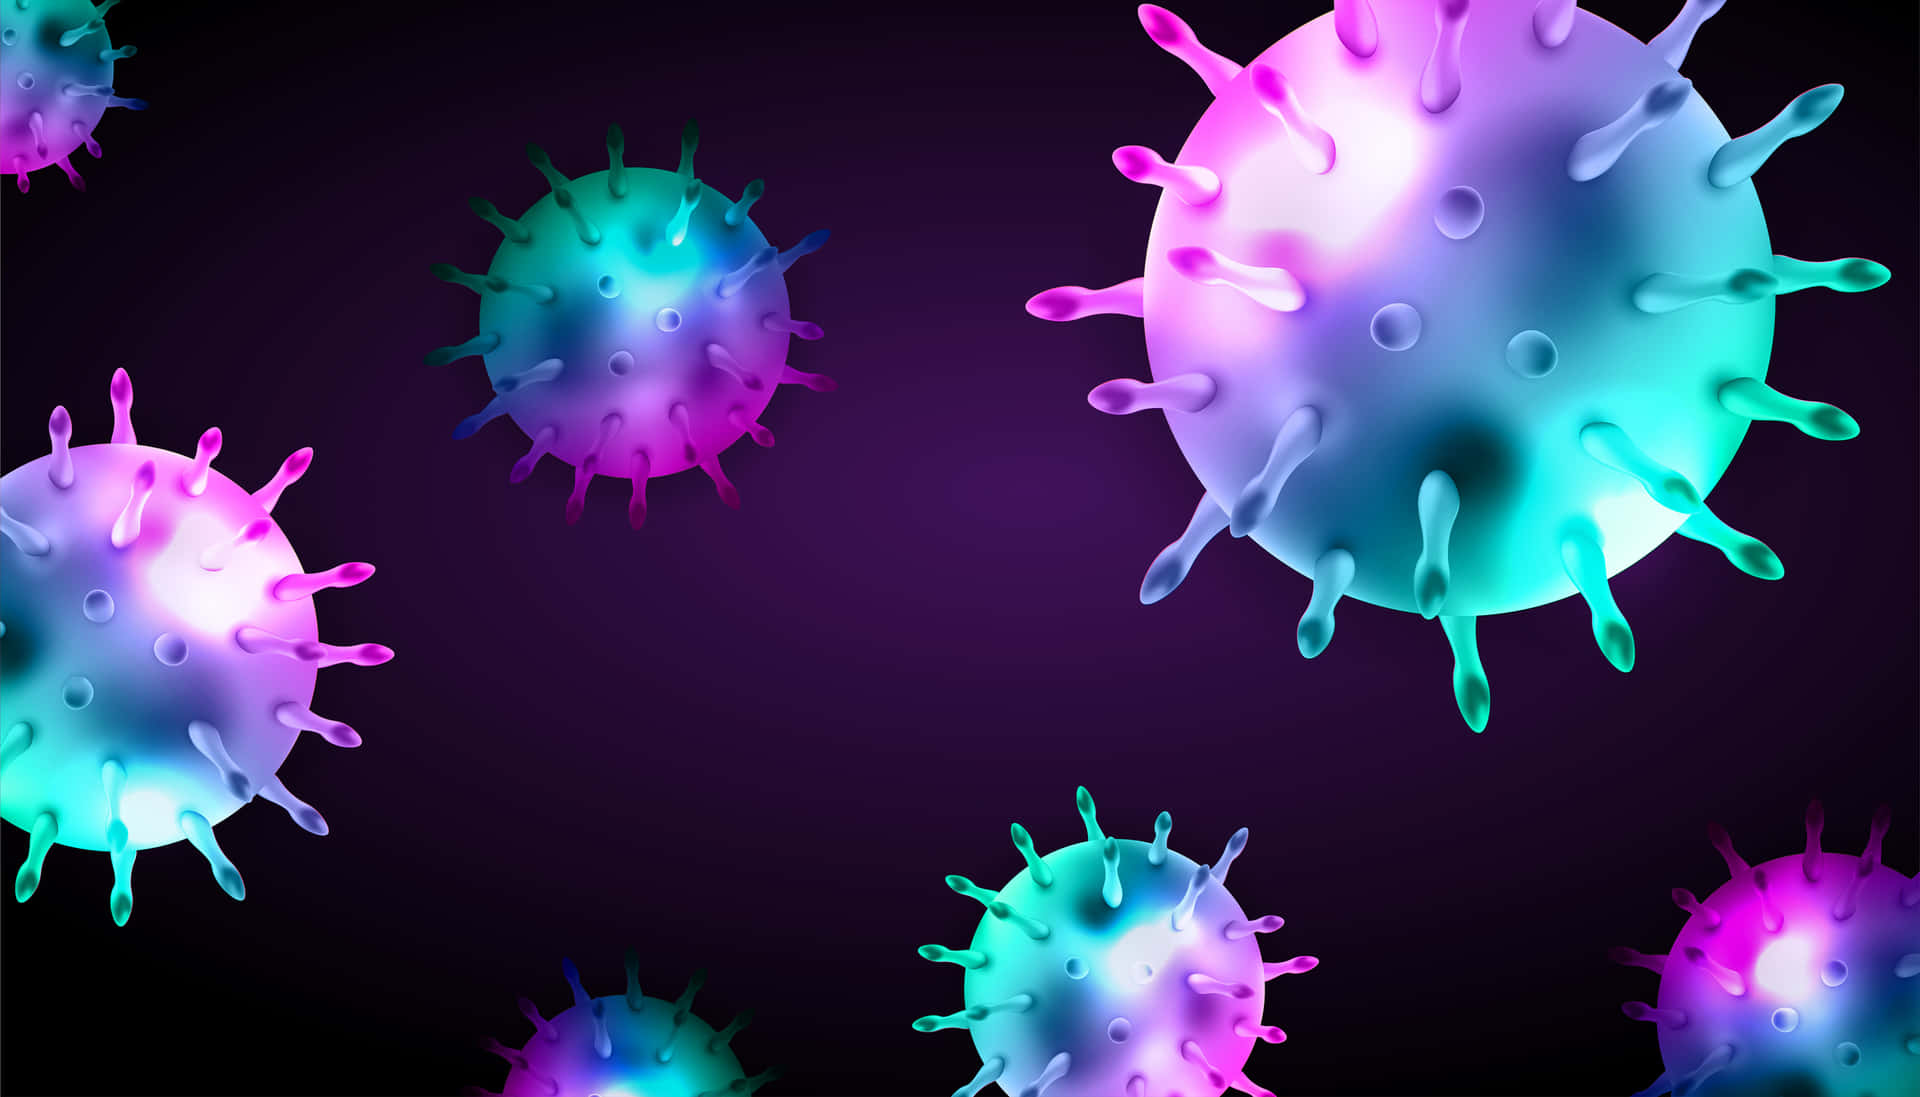 A Colorful Virus On A Black Background